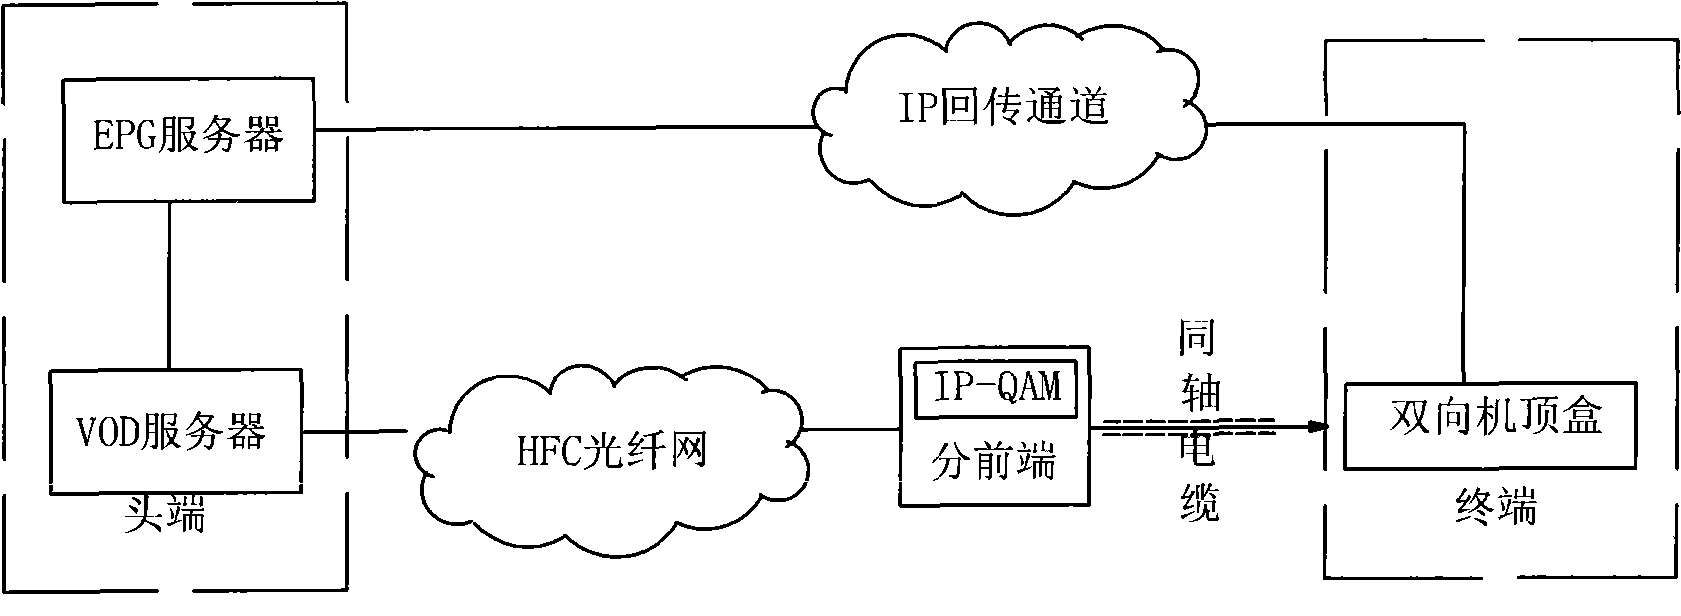 Method for requesting unidirectional wired TV set-top box video back-transmitted by using mobile communication network